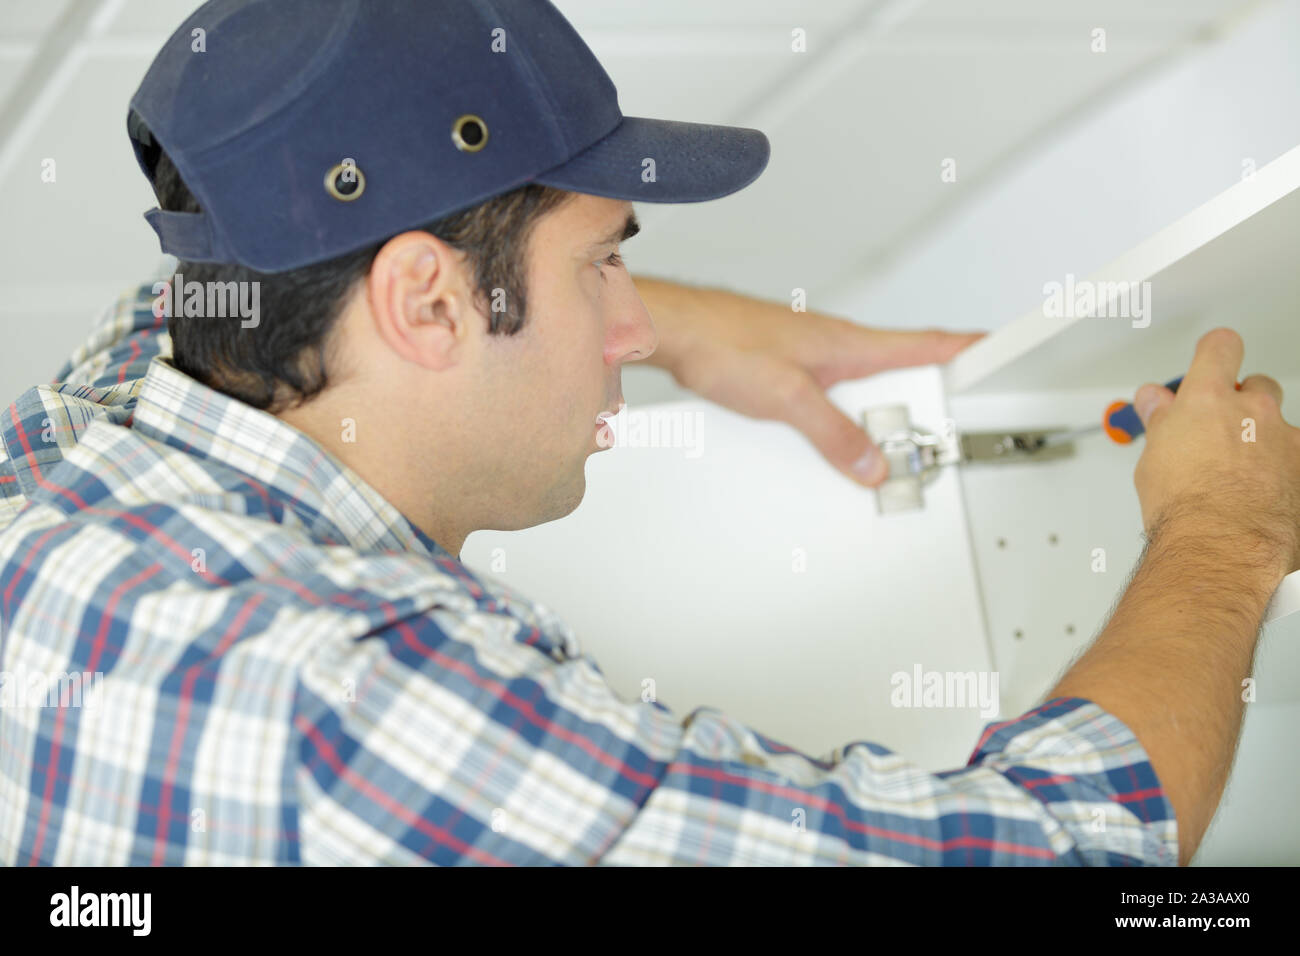 worker screws a cupboard with a screwdriver Stock Photo